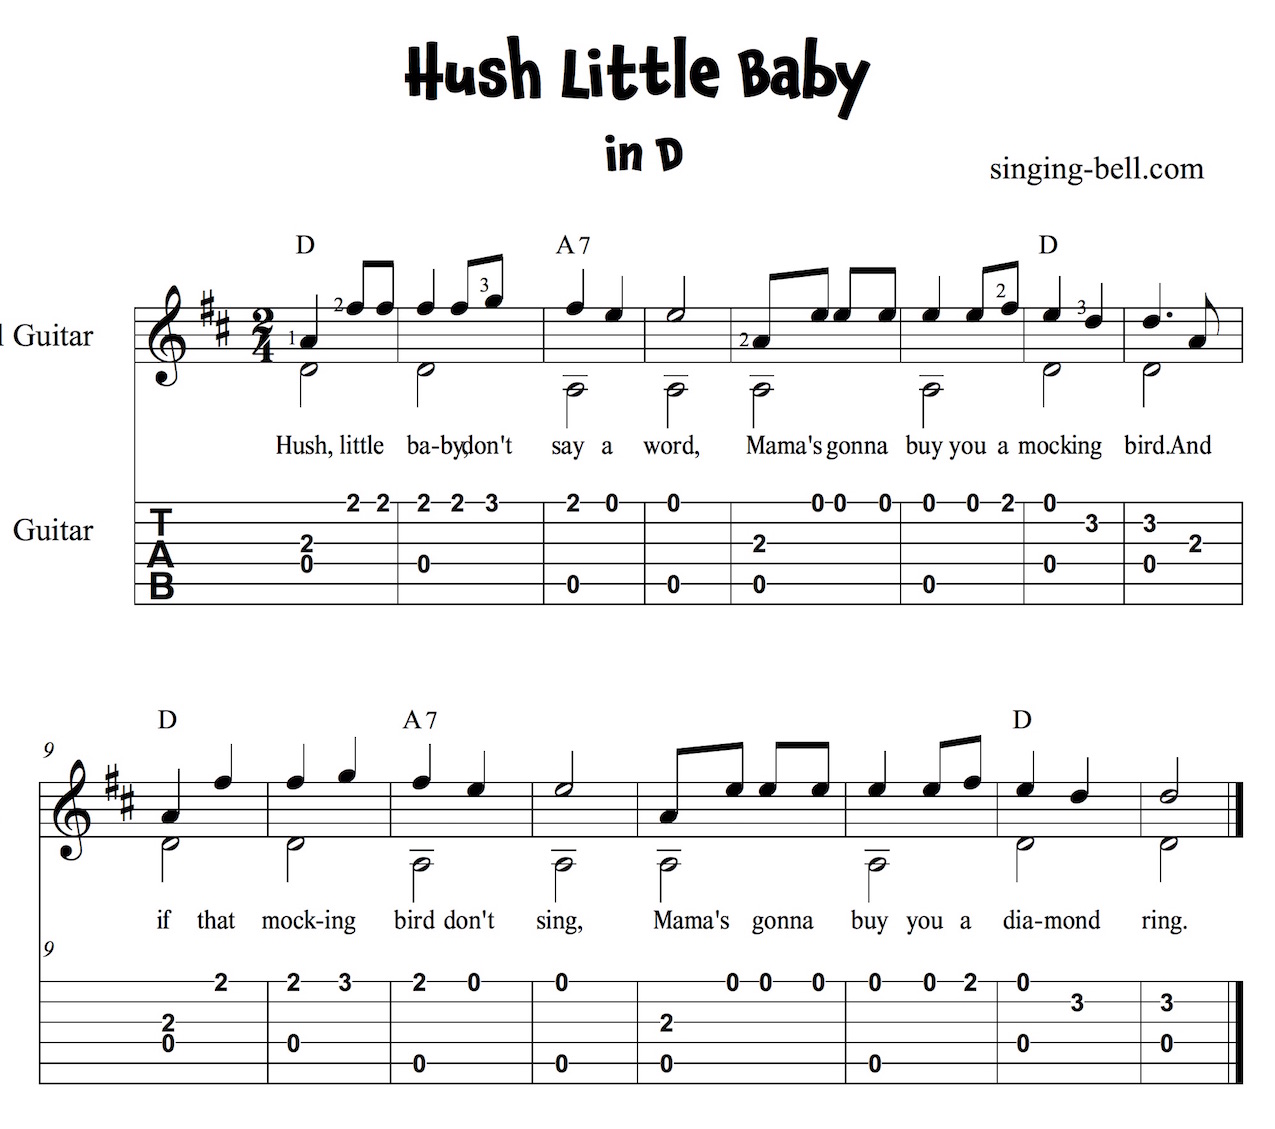 Hush, Little Baby Easy Guitar Sheet Music with notes and tablature in D.